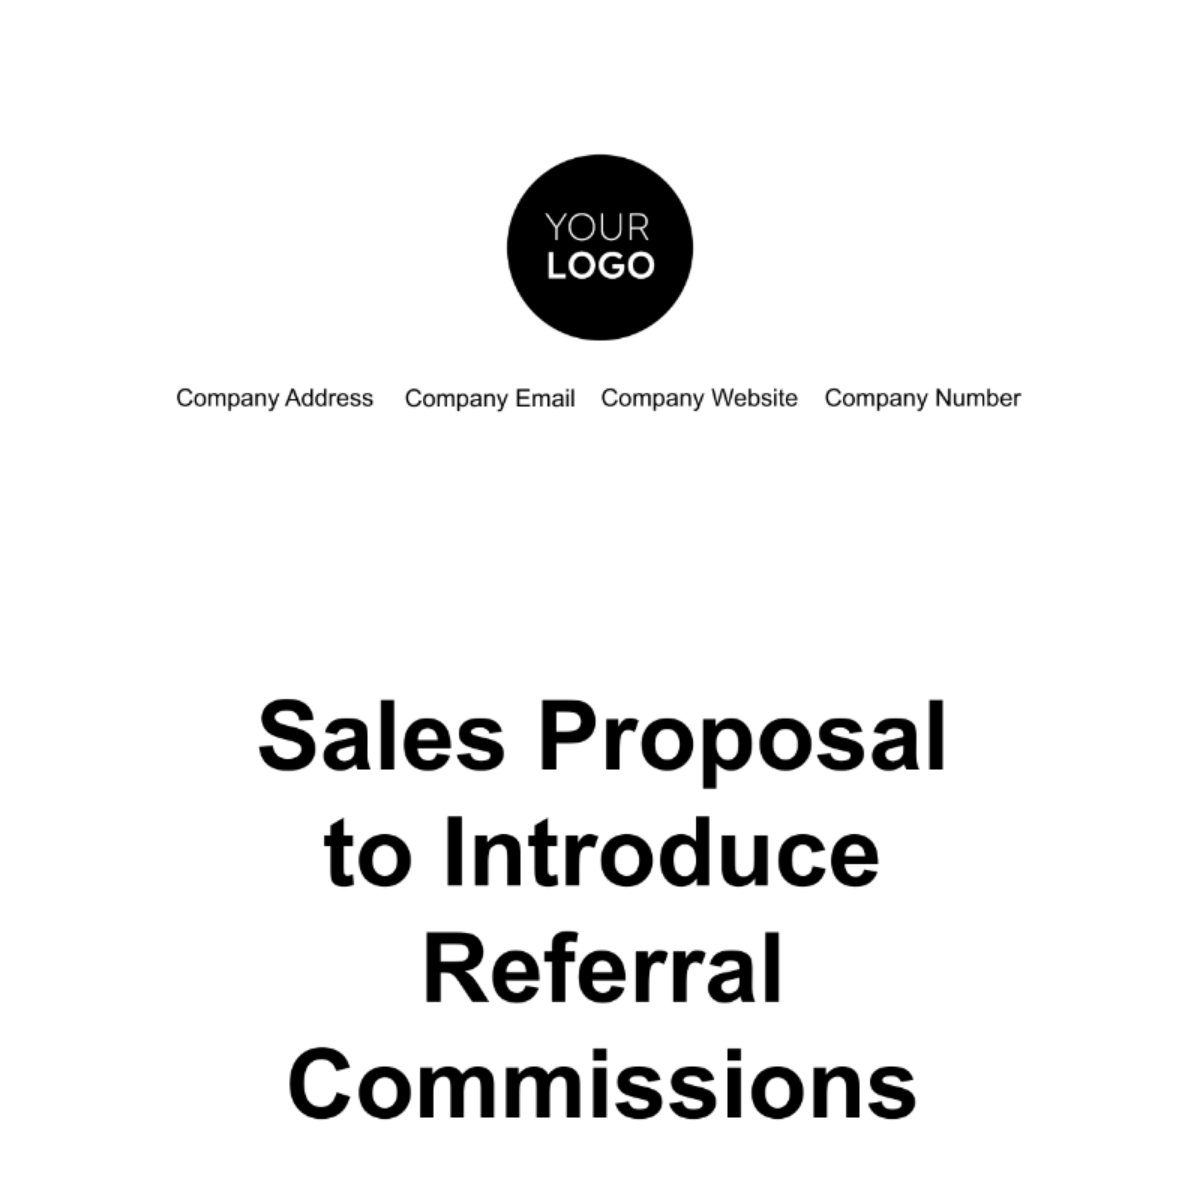 Free Sales Proposal to Introduce Referral Commissions Template